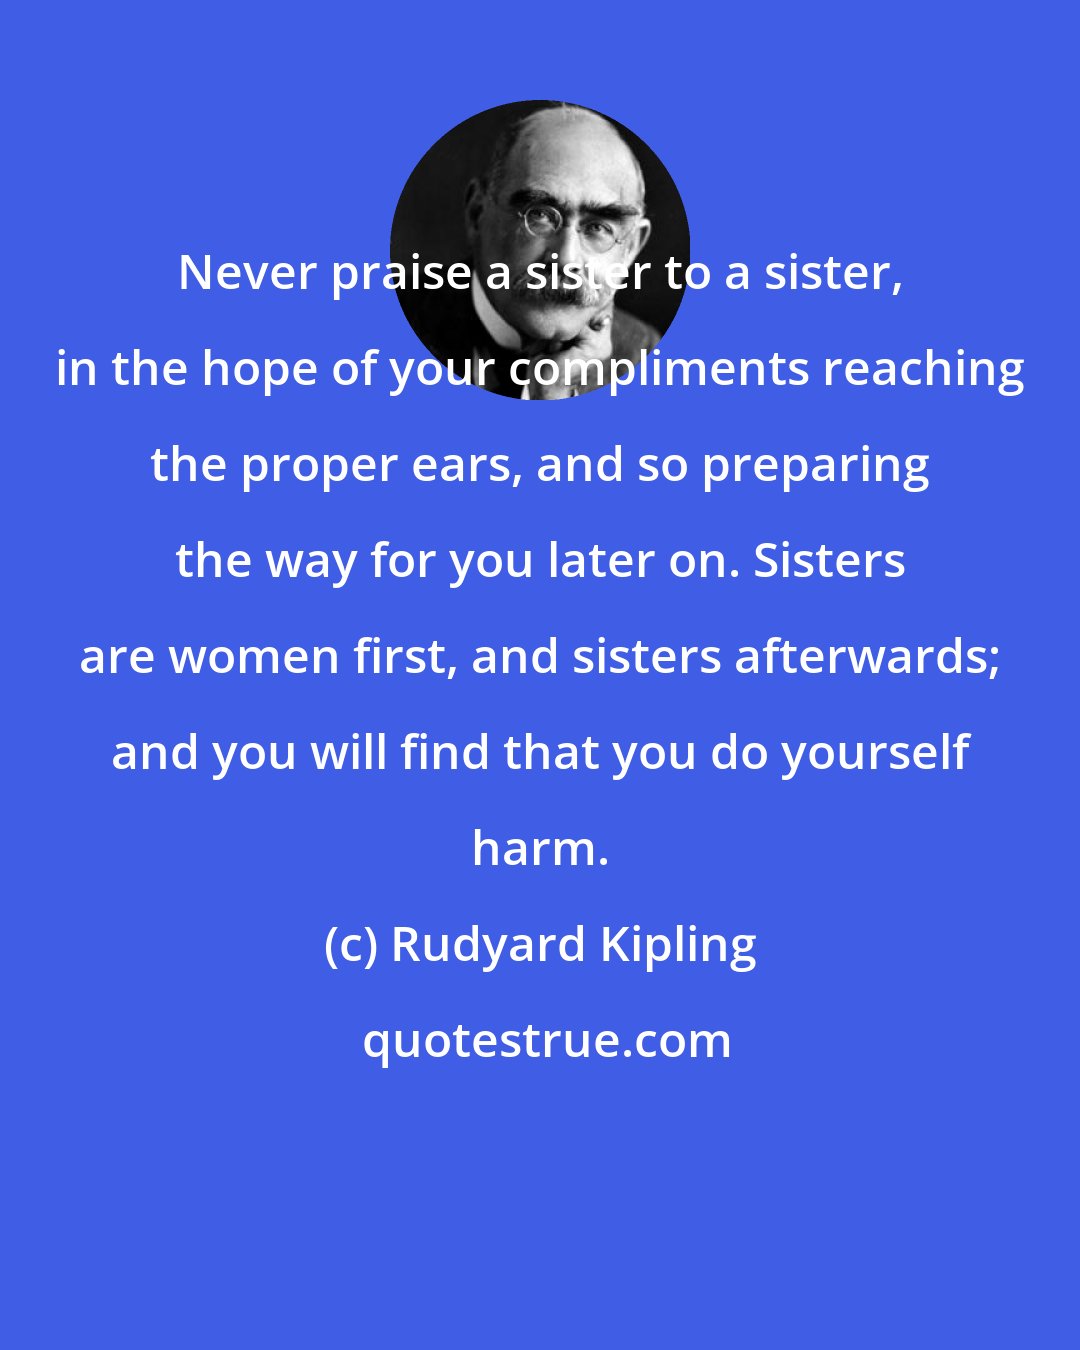 Rudyard Kipling: Never praise a sister to a sister, in the hope of your compliments reaching the proper ears, and so preparing the way for you later on. Sisters are women first, and sisters afterwards; and you will find that you do yourself harm.